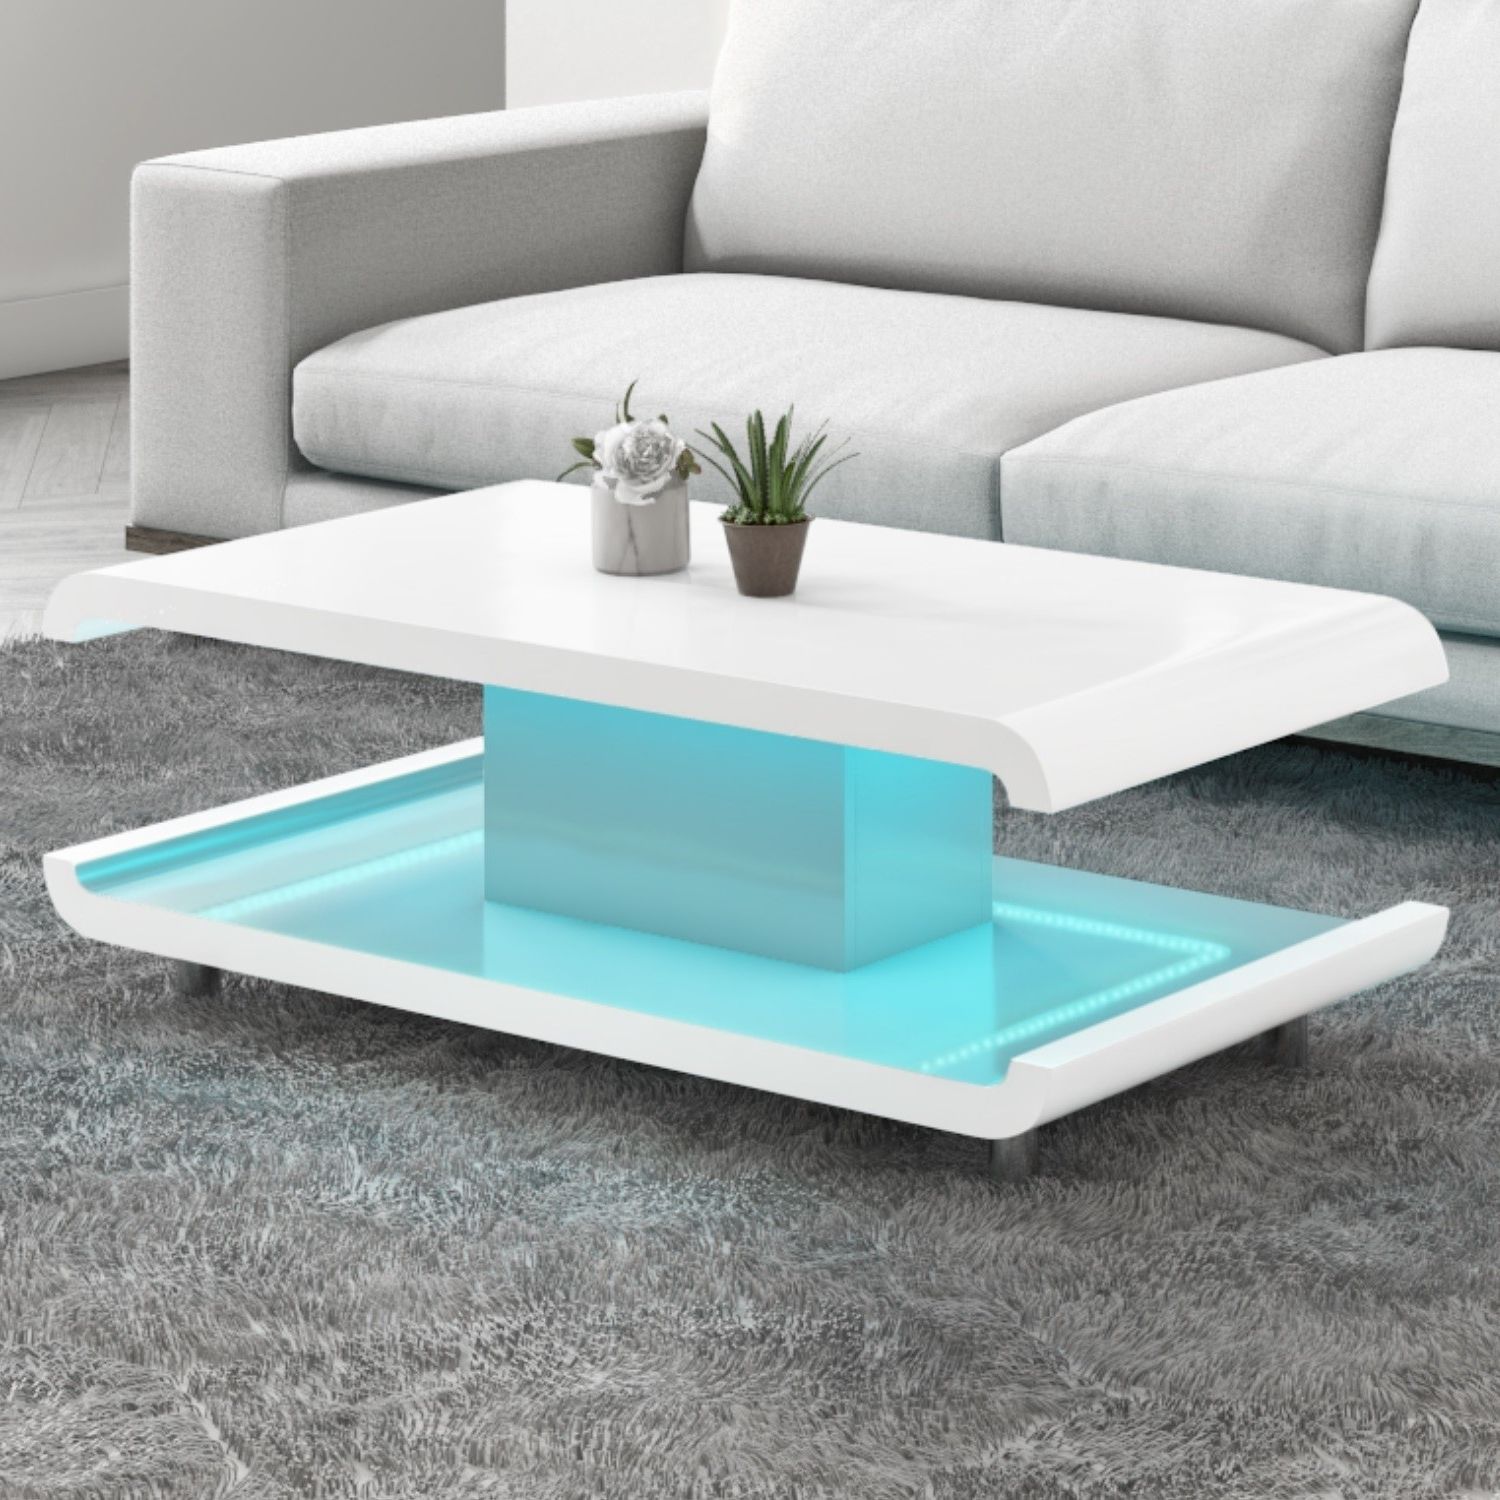 High Gloss White Coffee Table Led Range | Offer Of The Day Pertaining To Coffee Tables With Led Lights (View 10 of 20)